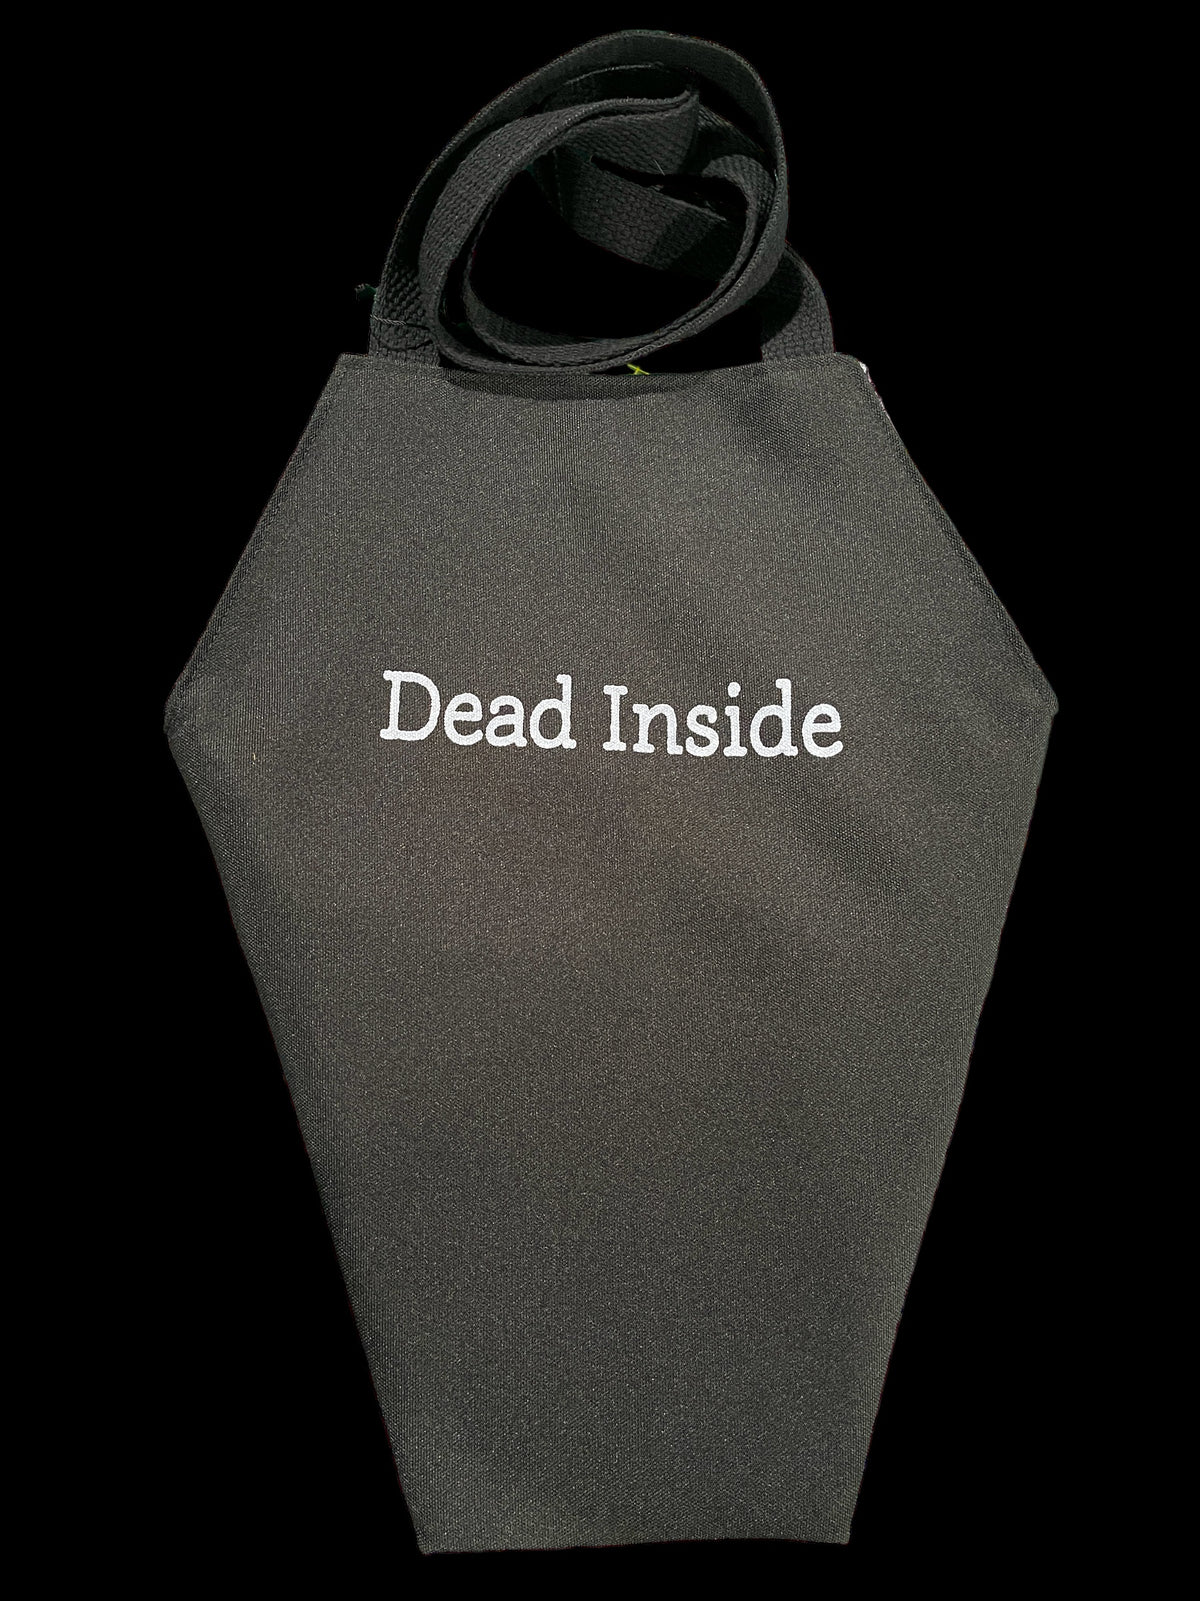 Dead Inside Coffin Tote Bag with Ghost Inside - Grey Variant 1